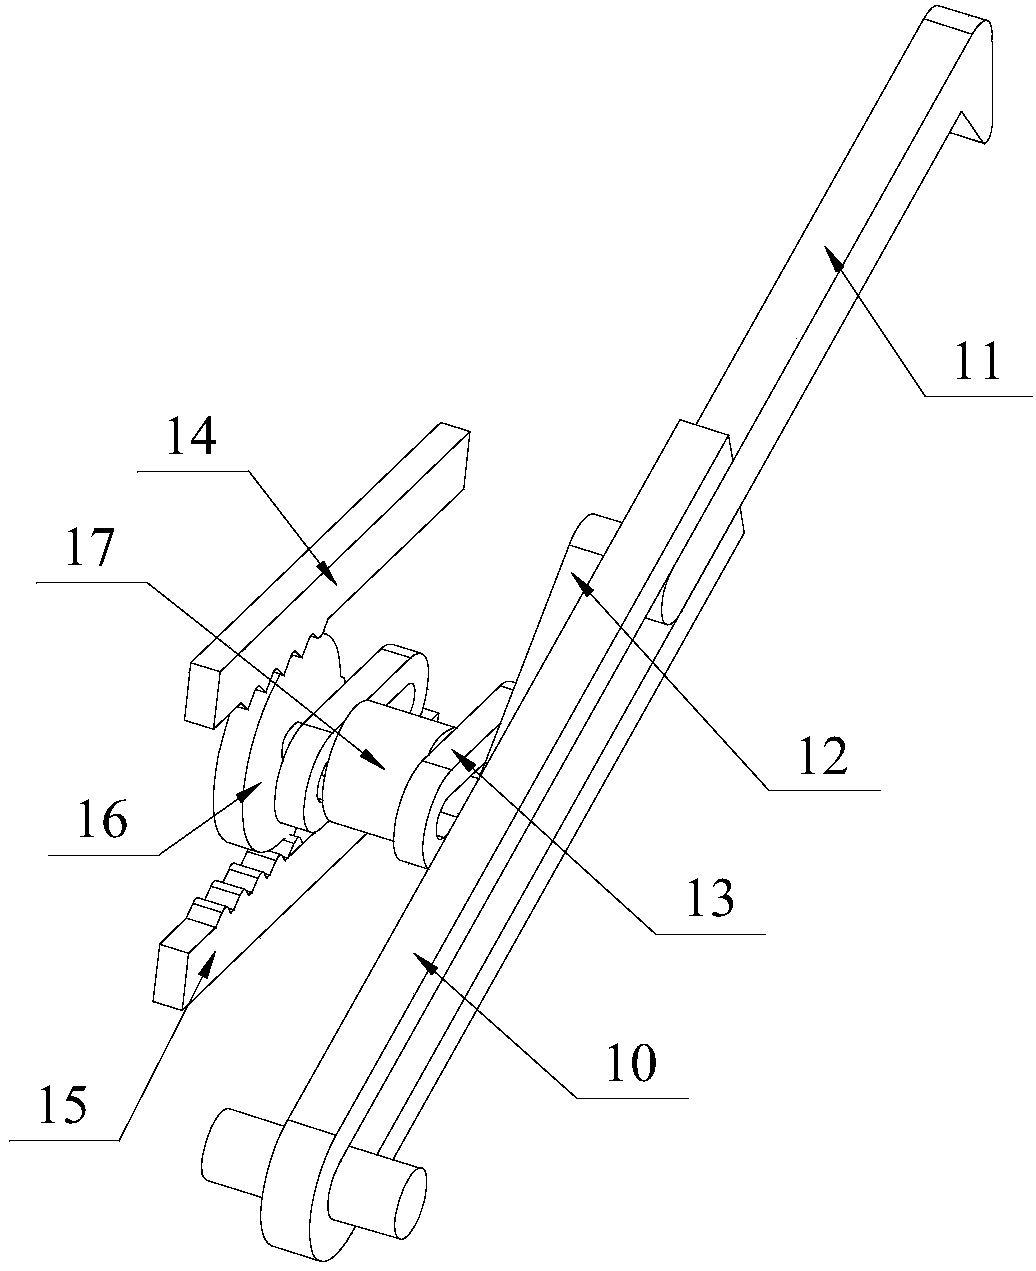 Novel intermittent conveying device